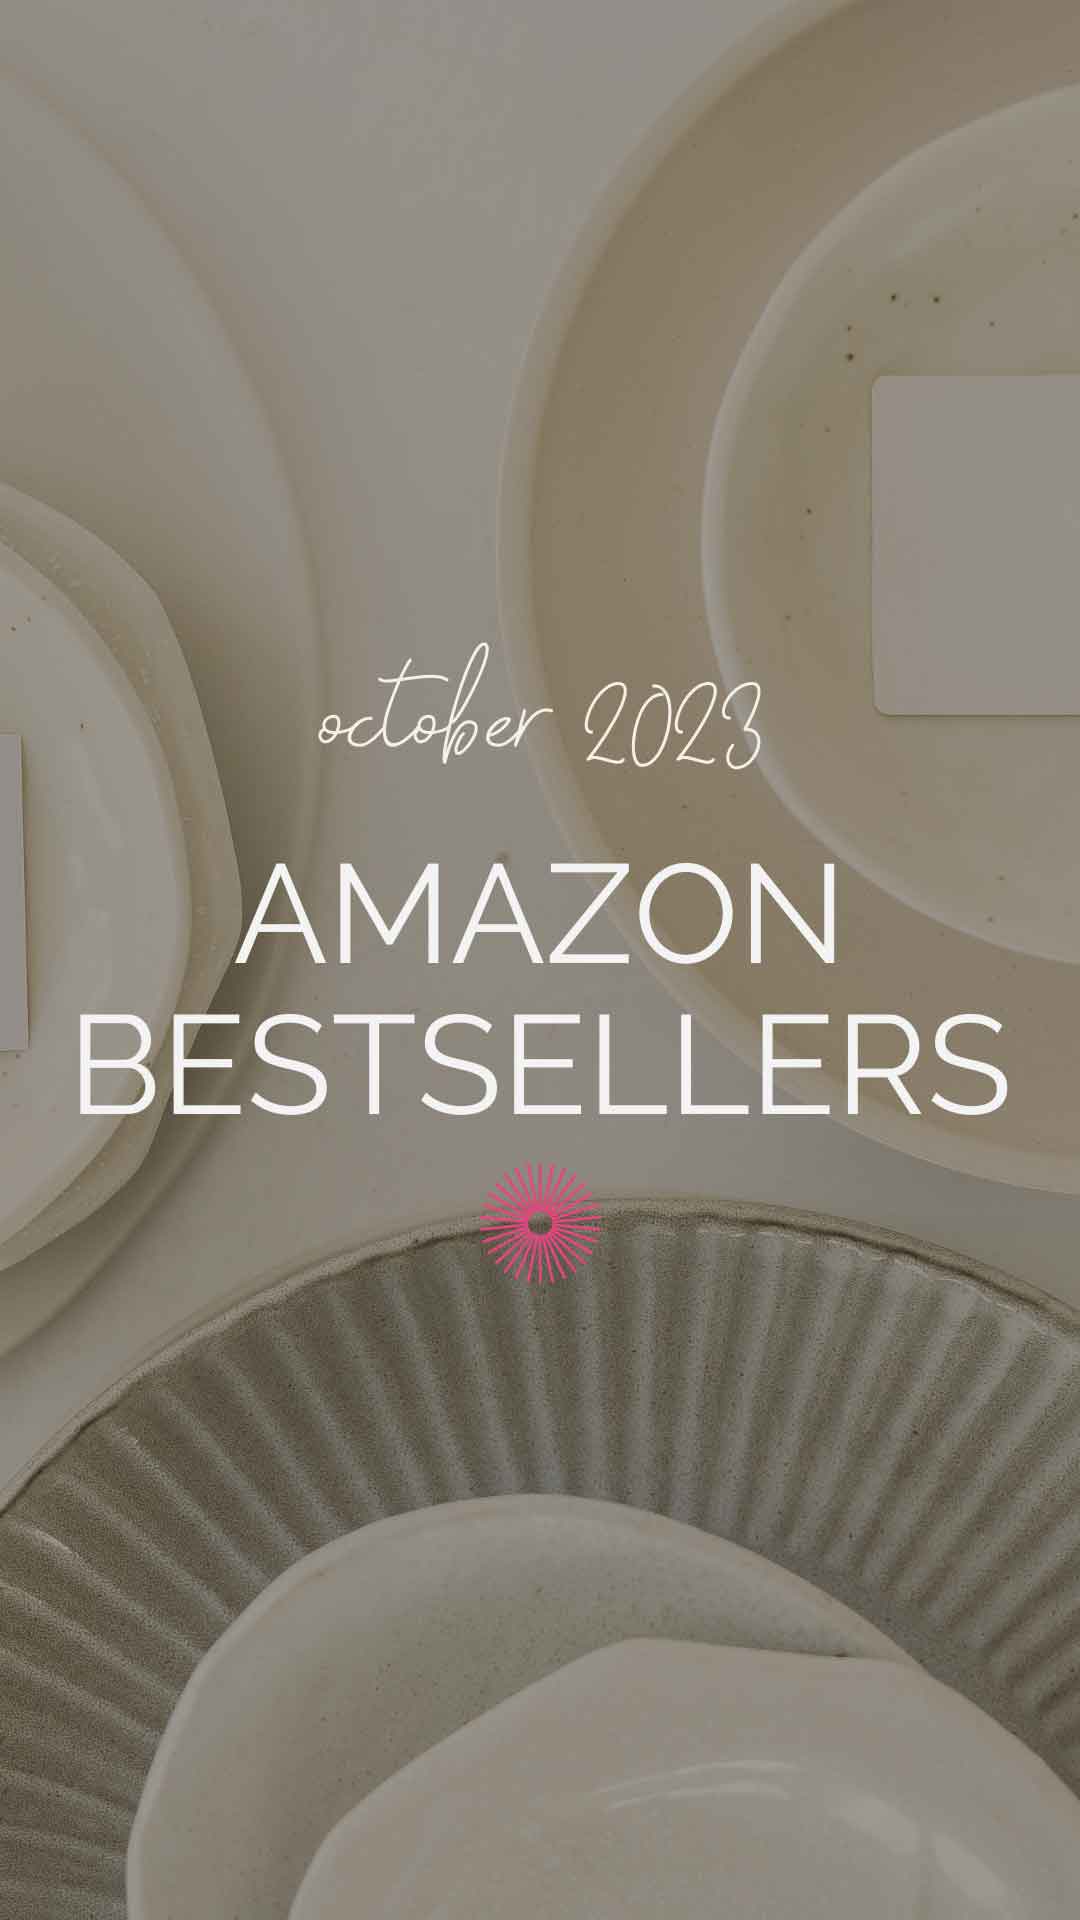 Beige plates and background with text overlay "October 2023 Amazon Bestsellers".